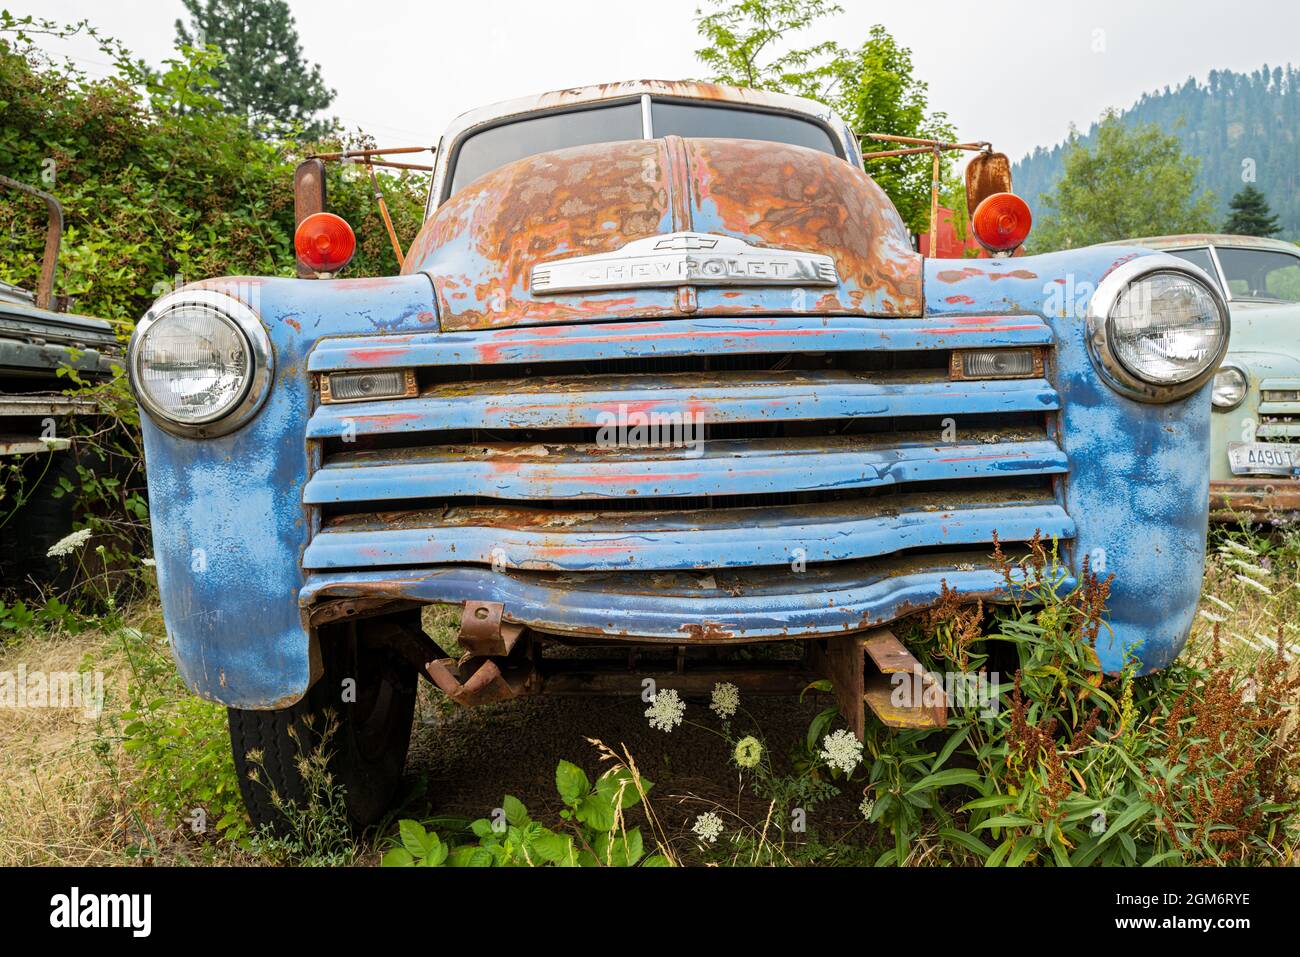 The grille of a blue 1949 Chevy 6400 truck in Idaho, USA Stock Photo